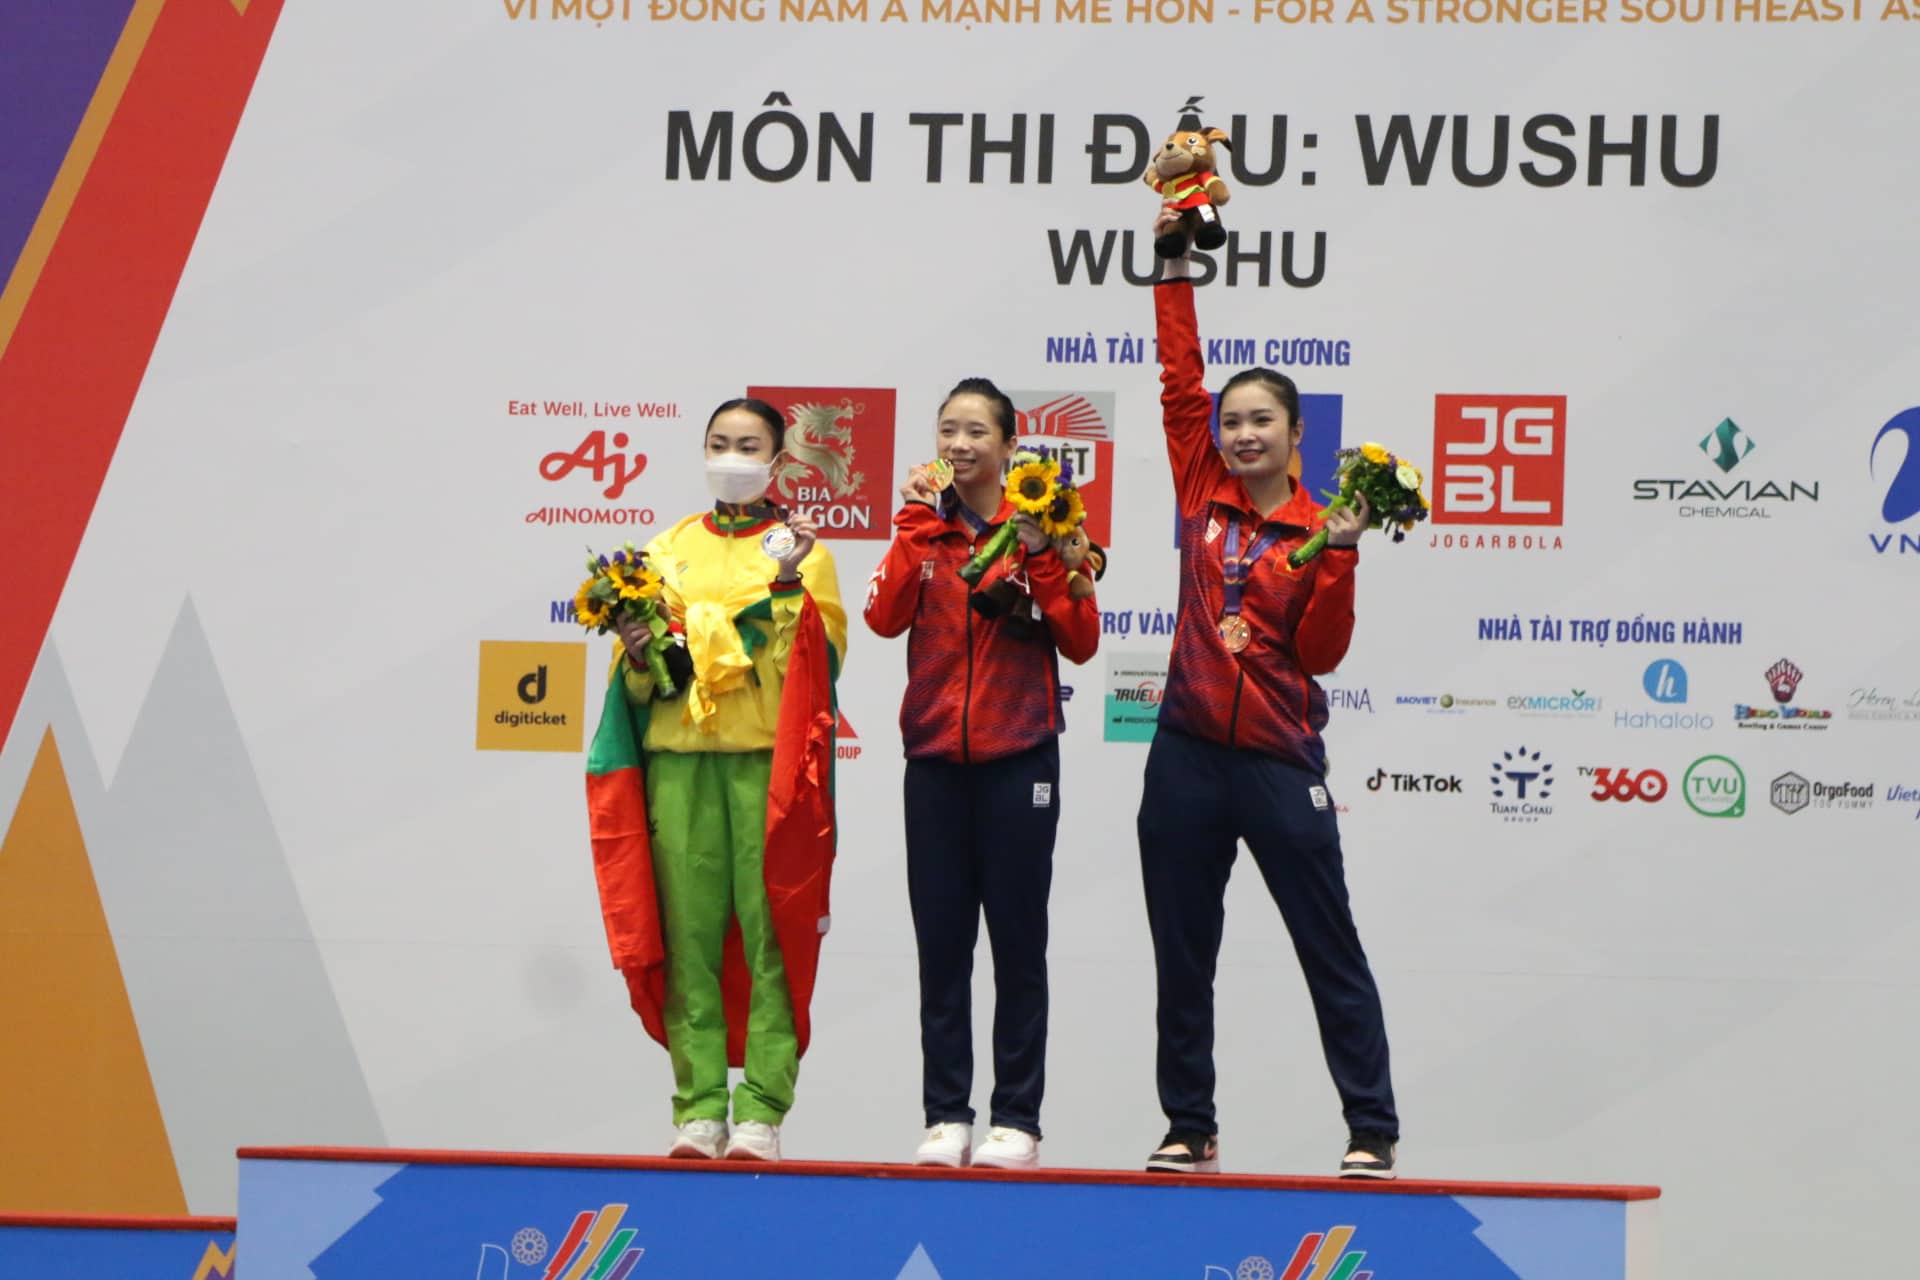 Vietnam leads SEA Games medal table with 31 golds